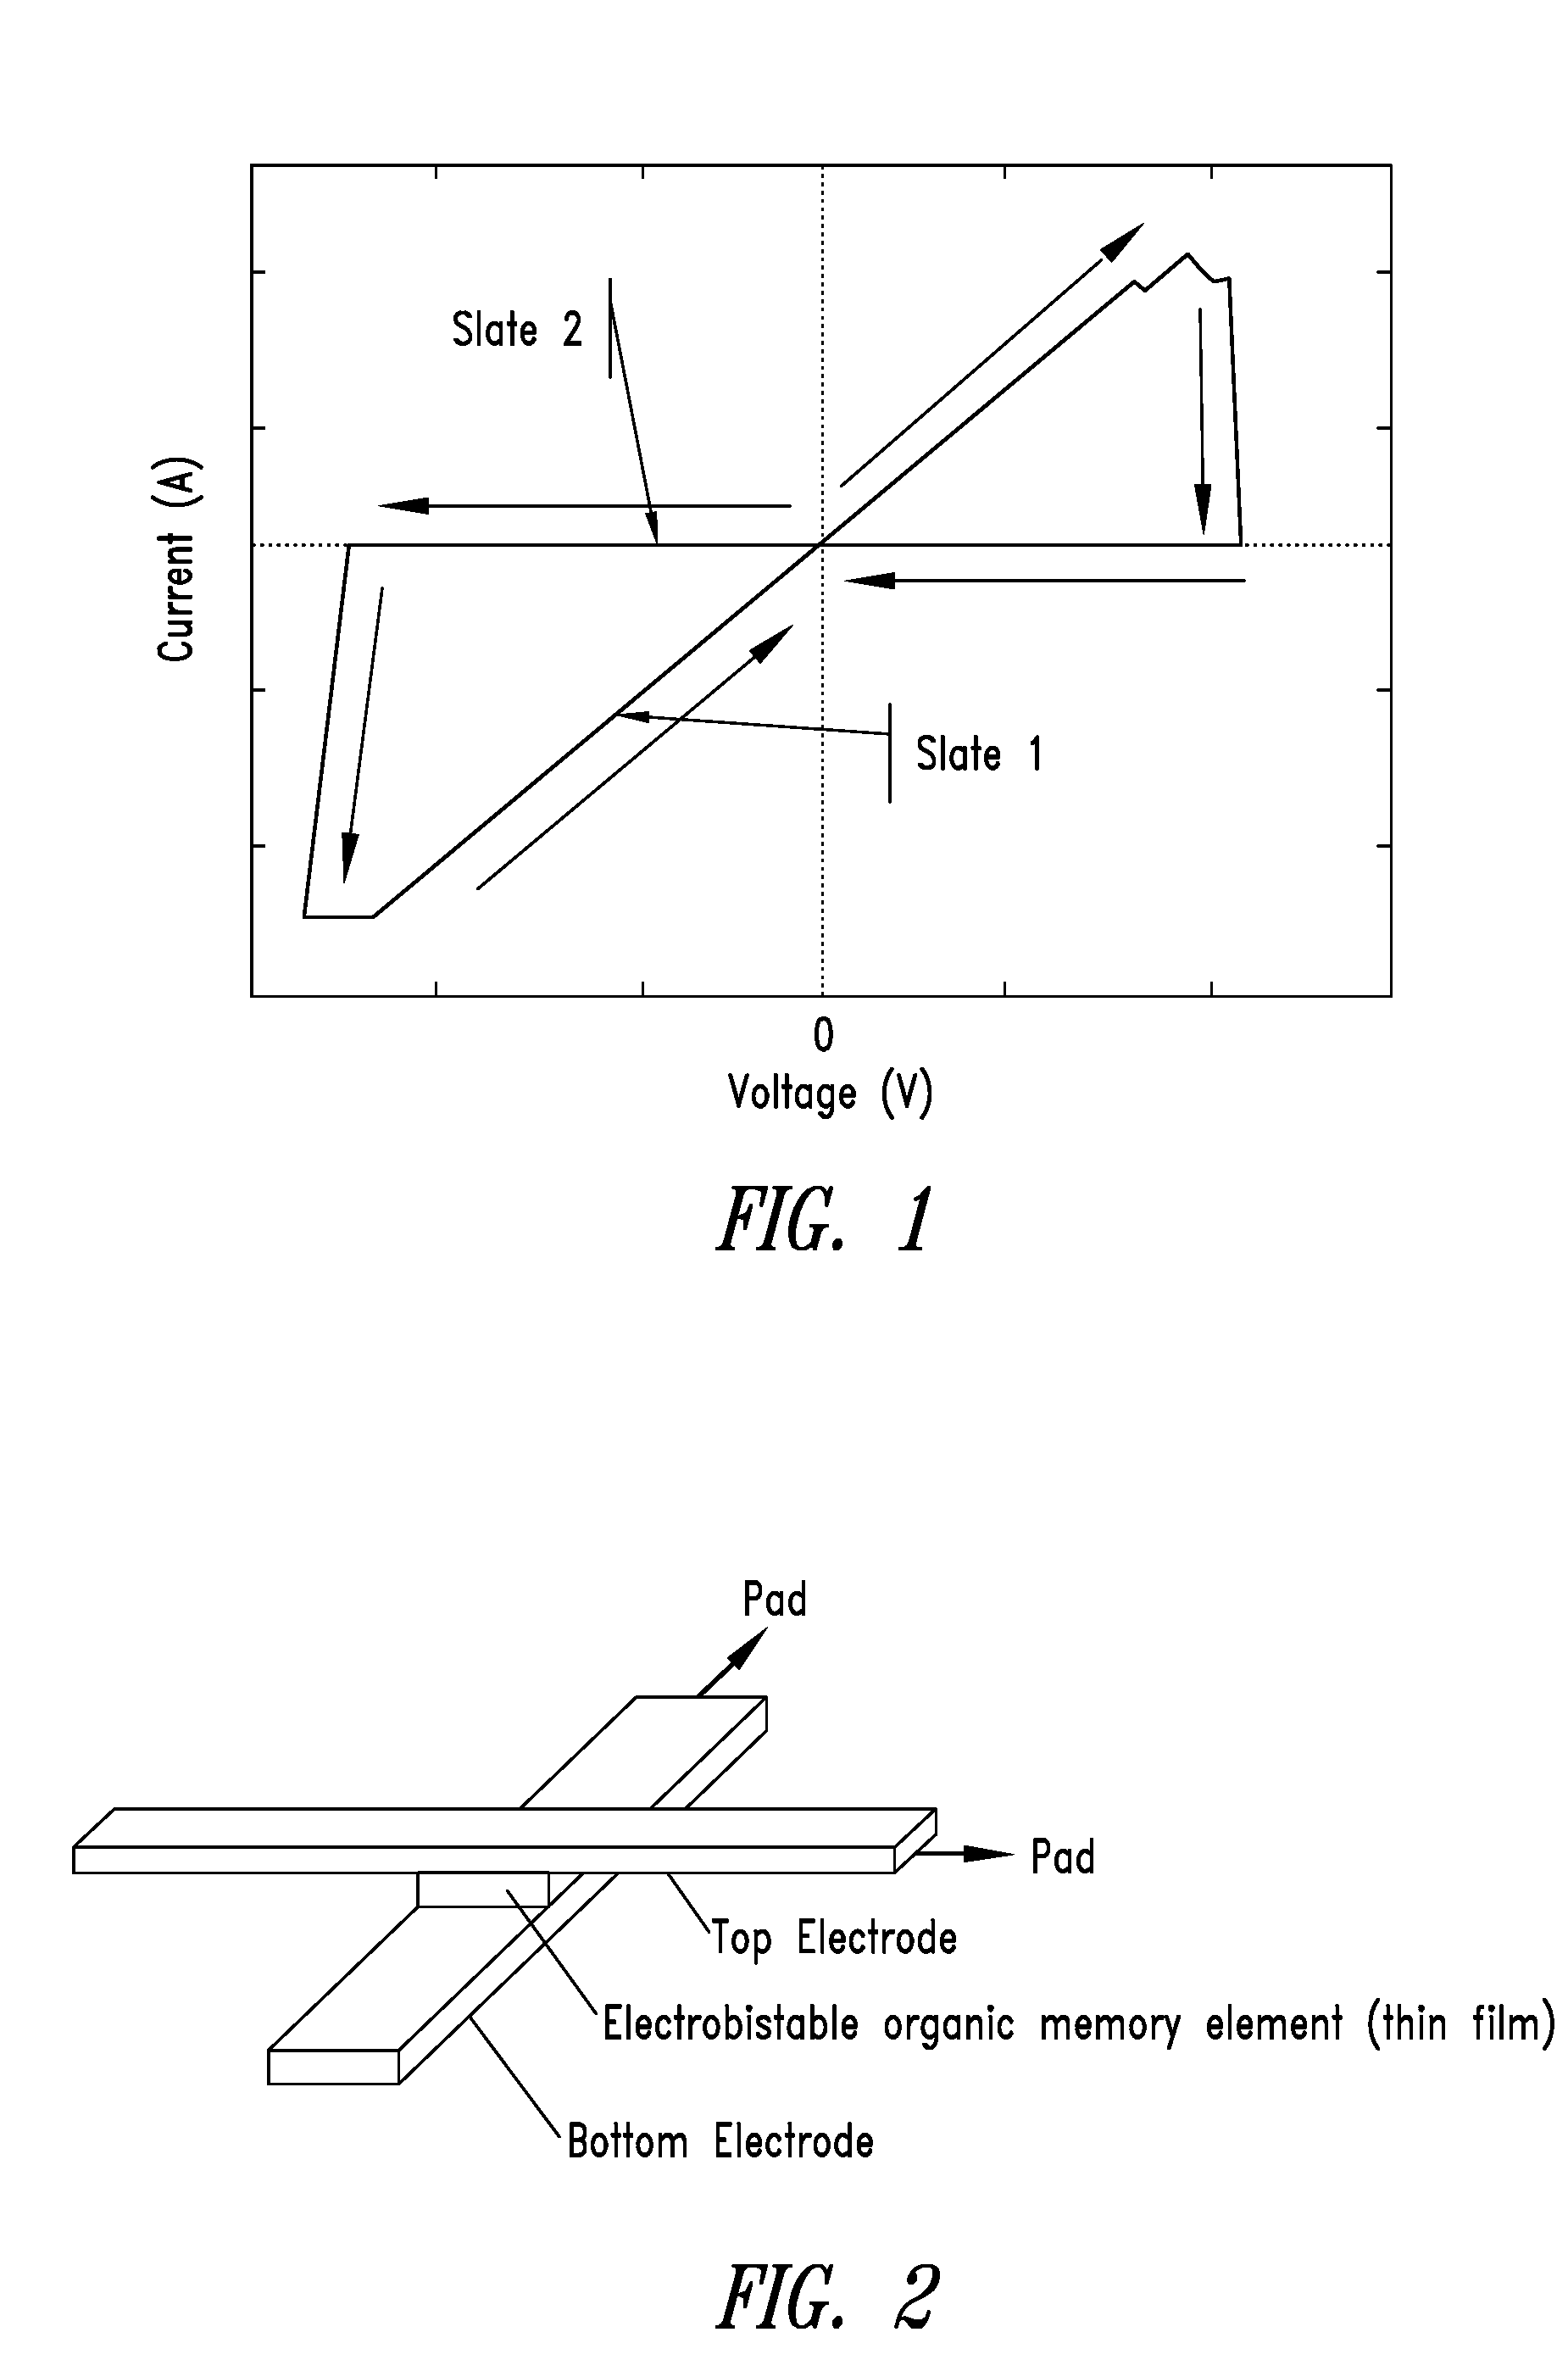 Process for synthesizing halogenated derivatives of fluorescein for use in the production of non-volatile memory devices